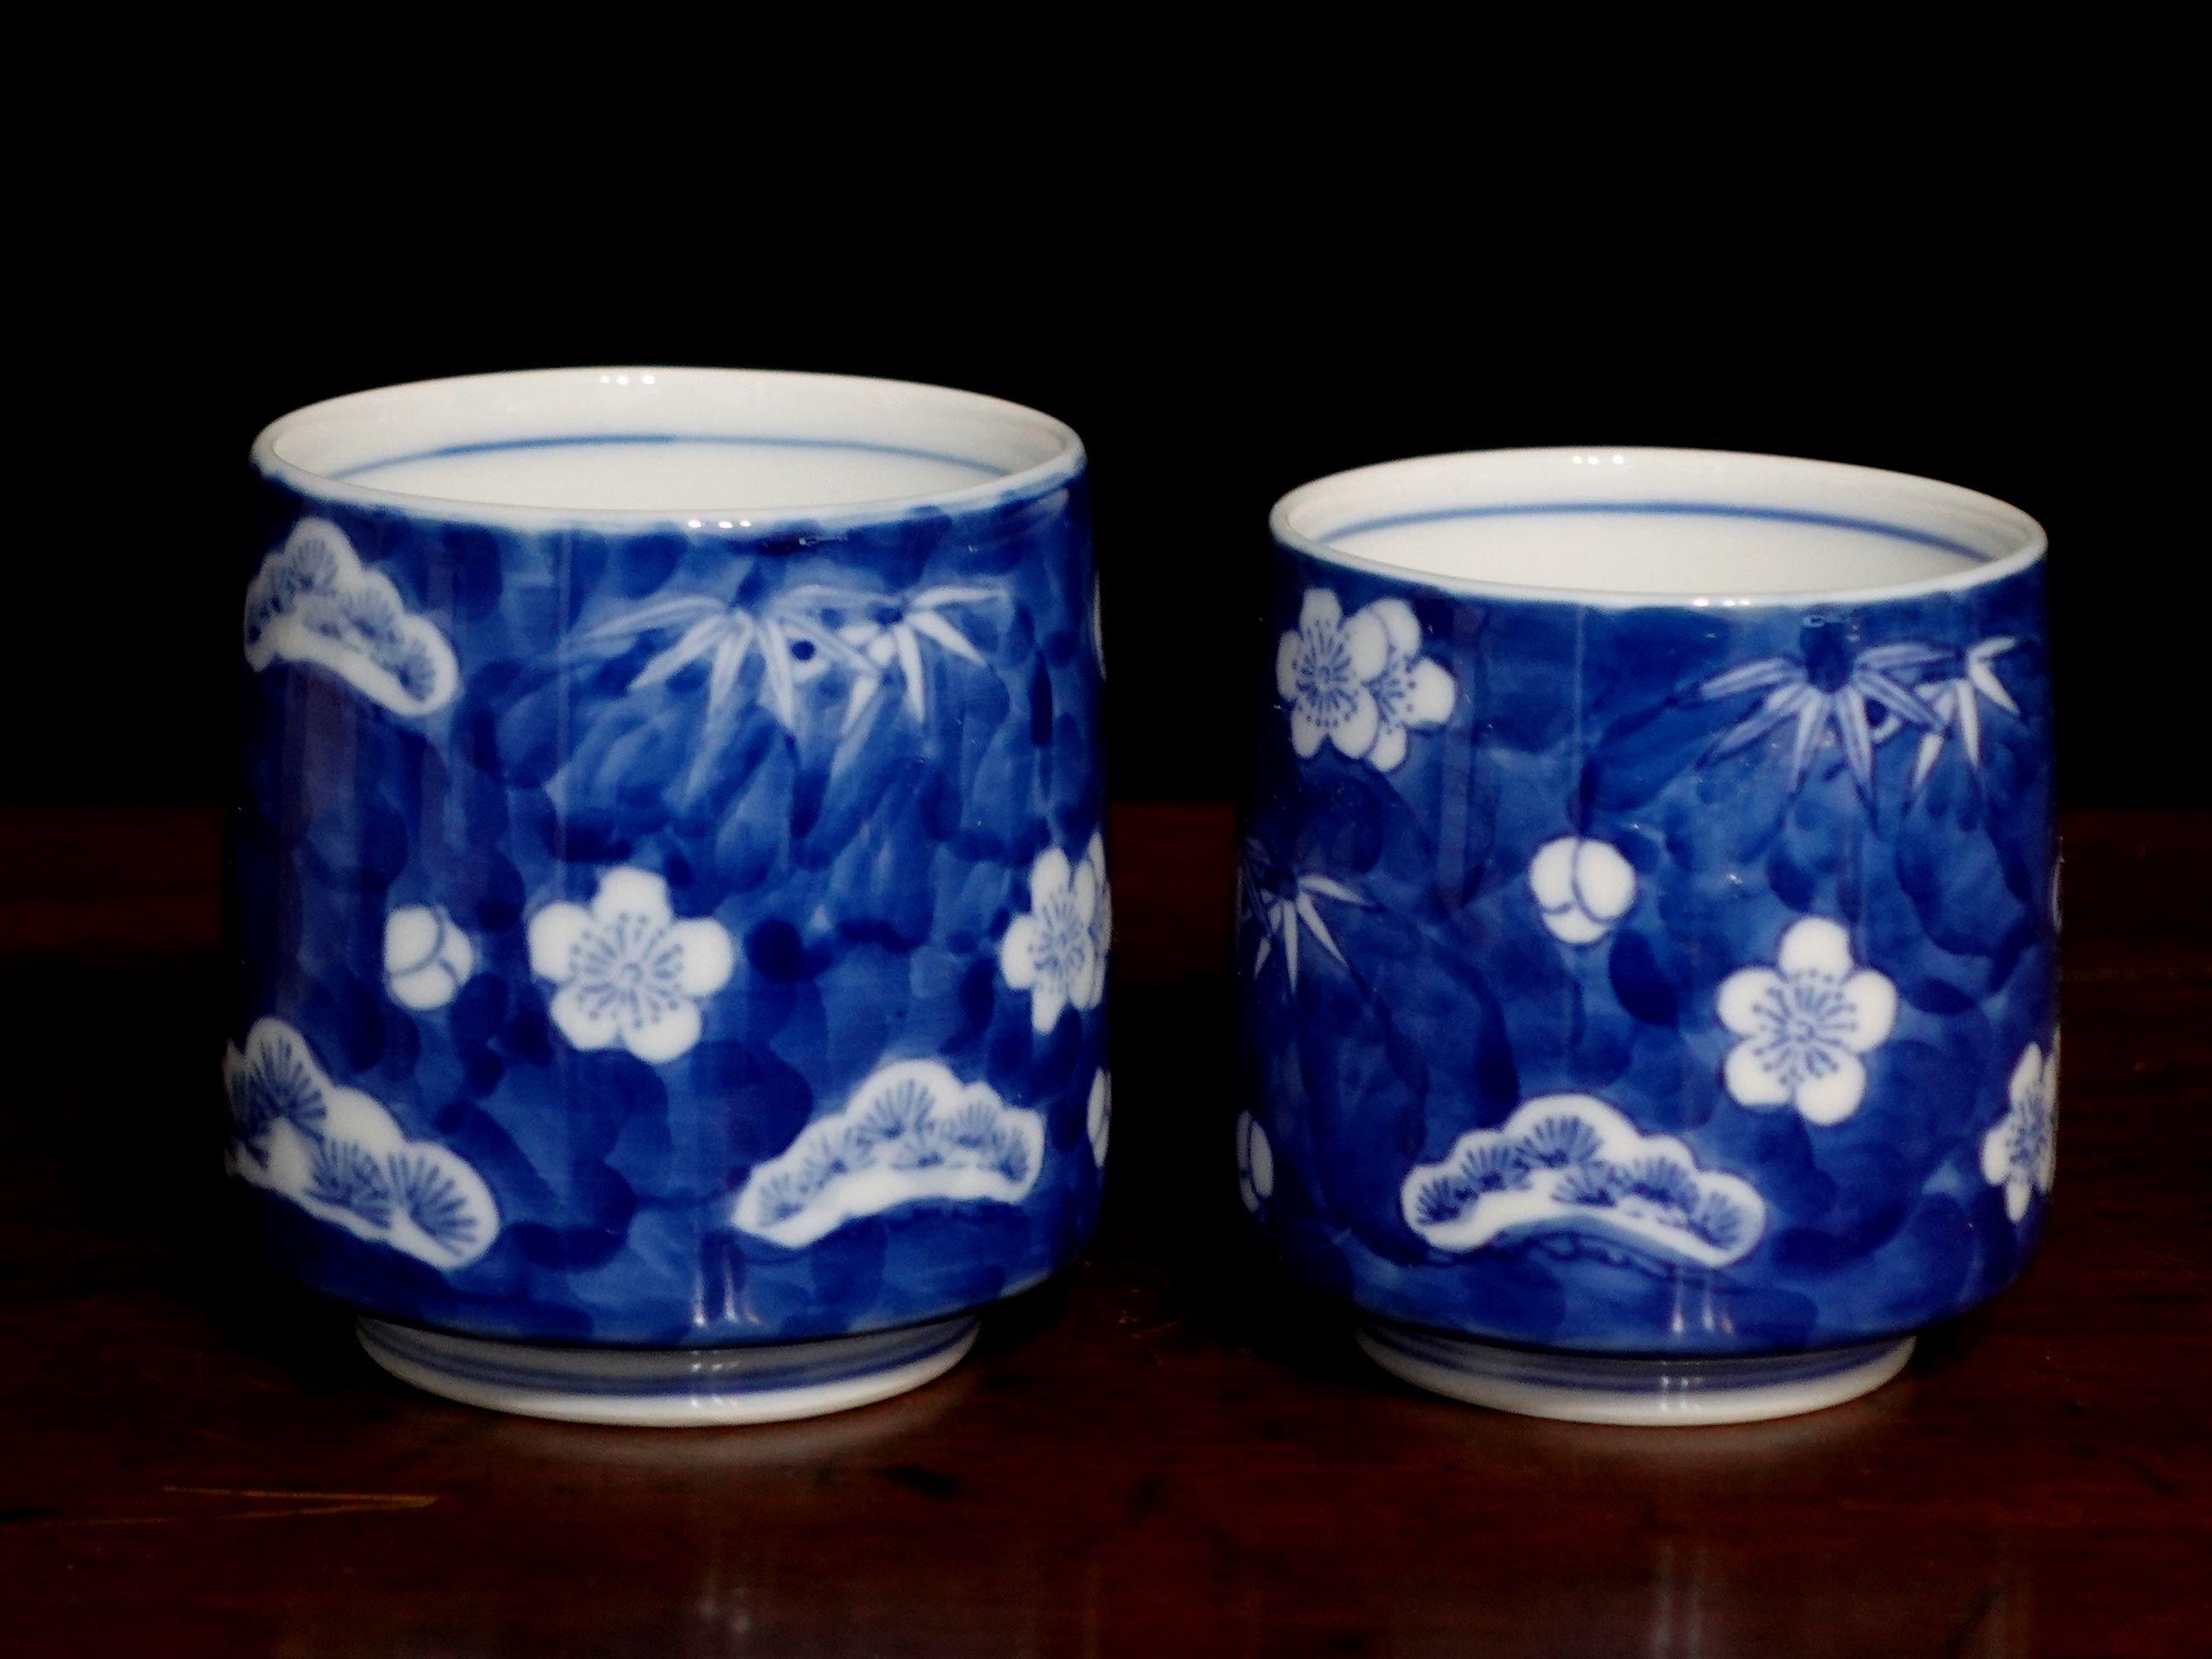 Vintage pair of fukagawa porcelain tea cups - signed and original box included.
Blue and White with the patterns of bamboo, plums, and pine tree leaves.
In good original new condition and just found in the warehouse, never used before.